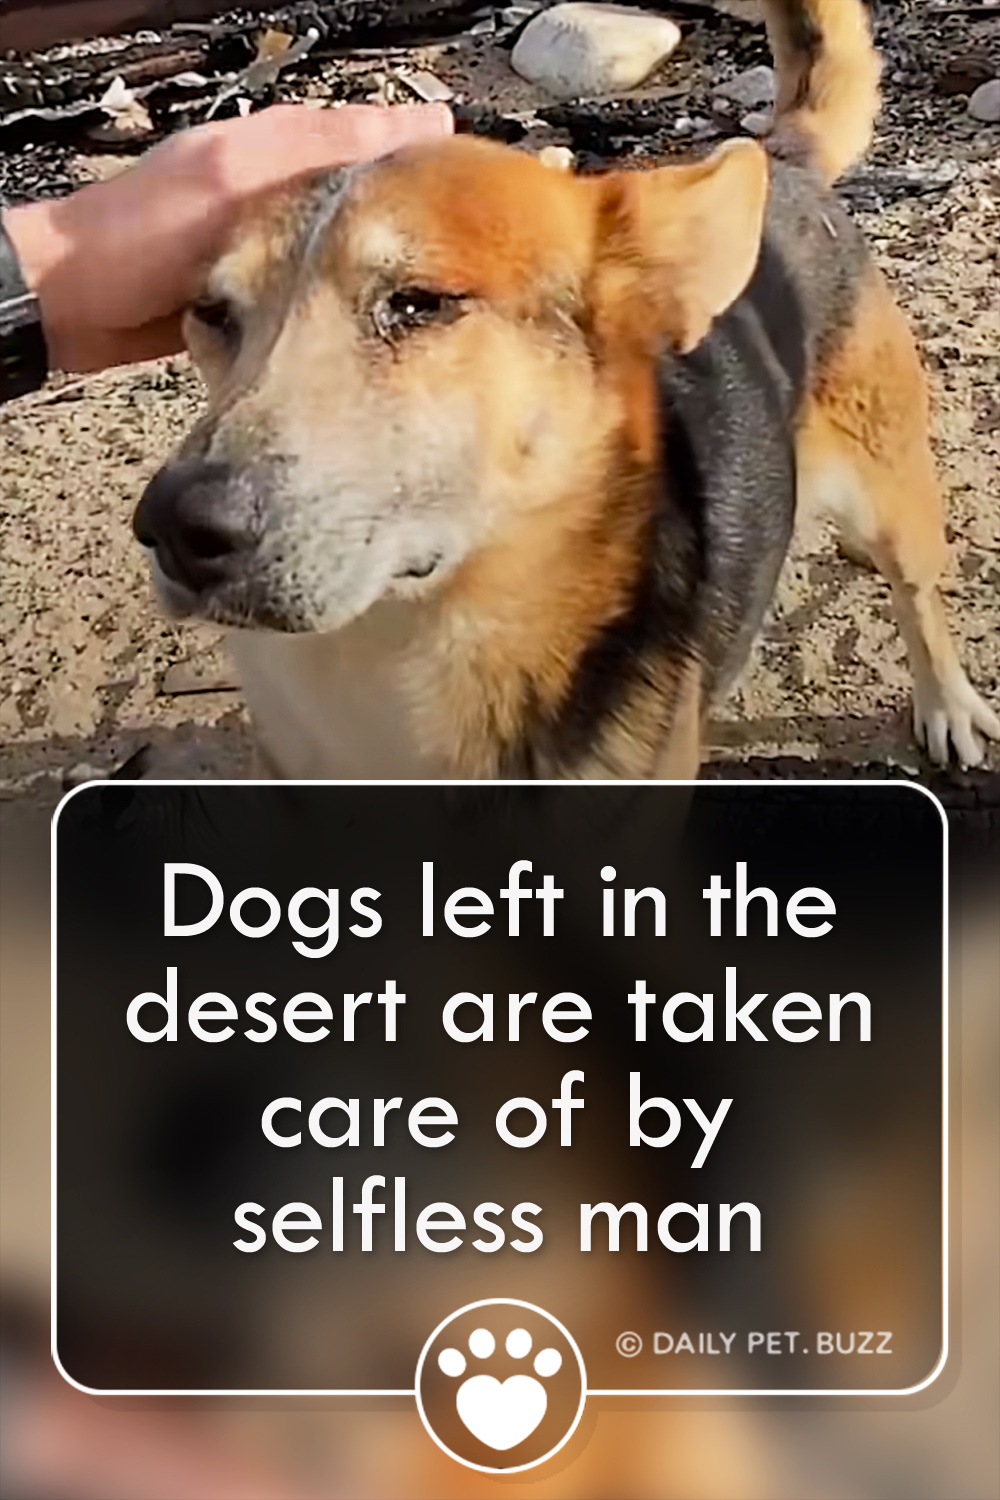 Dogs left in the desert are taken care of by selfless man